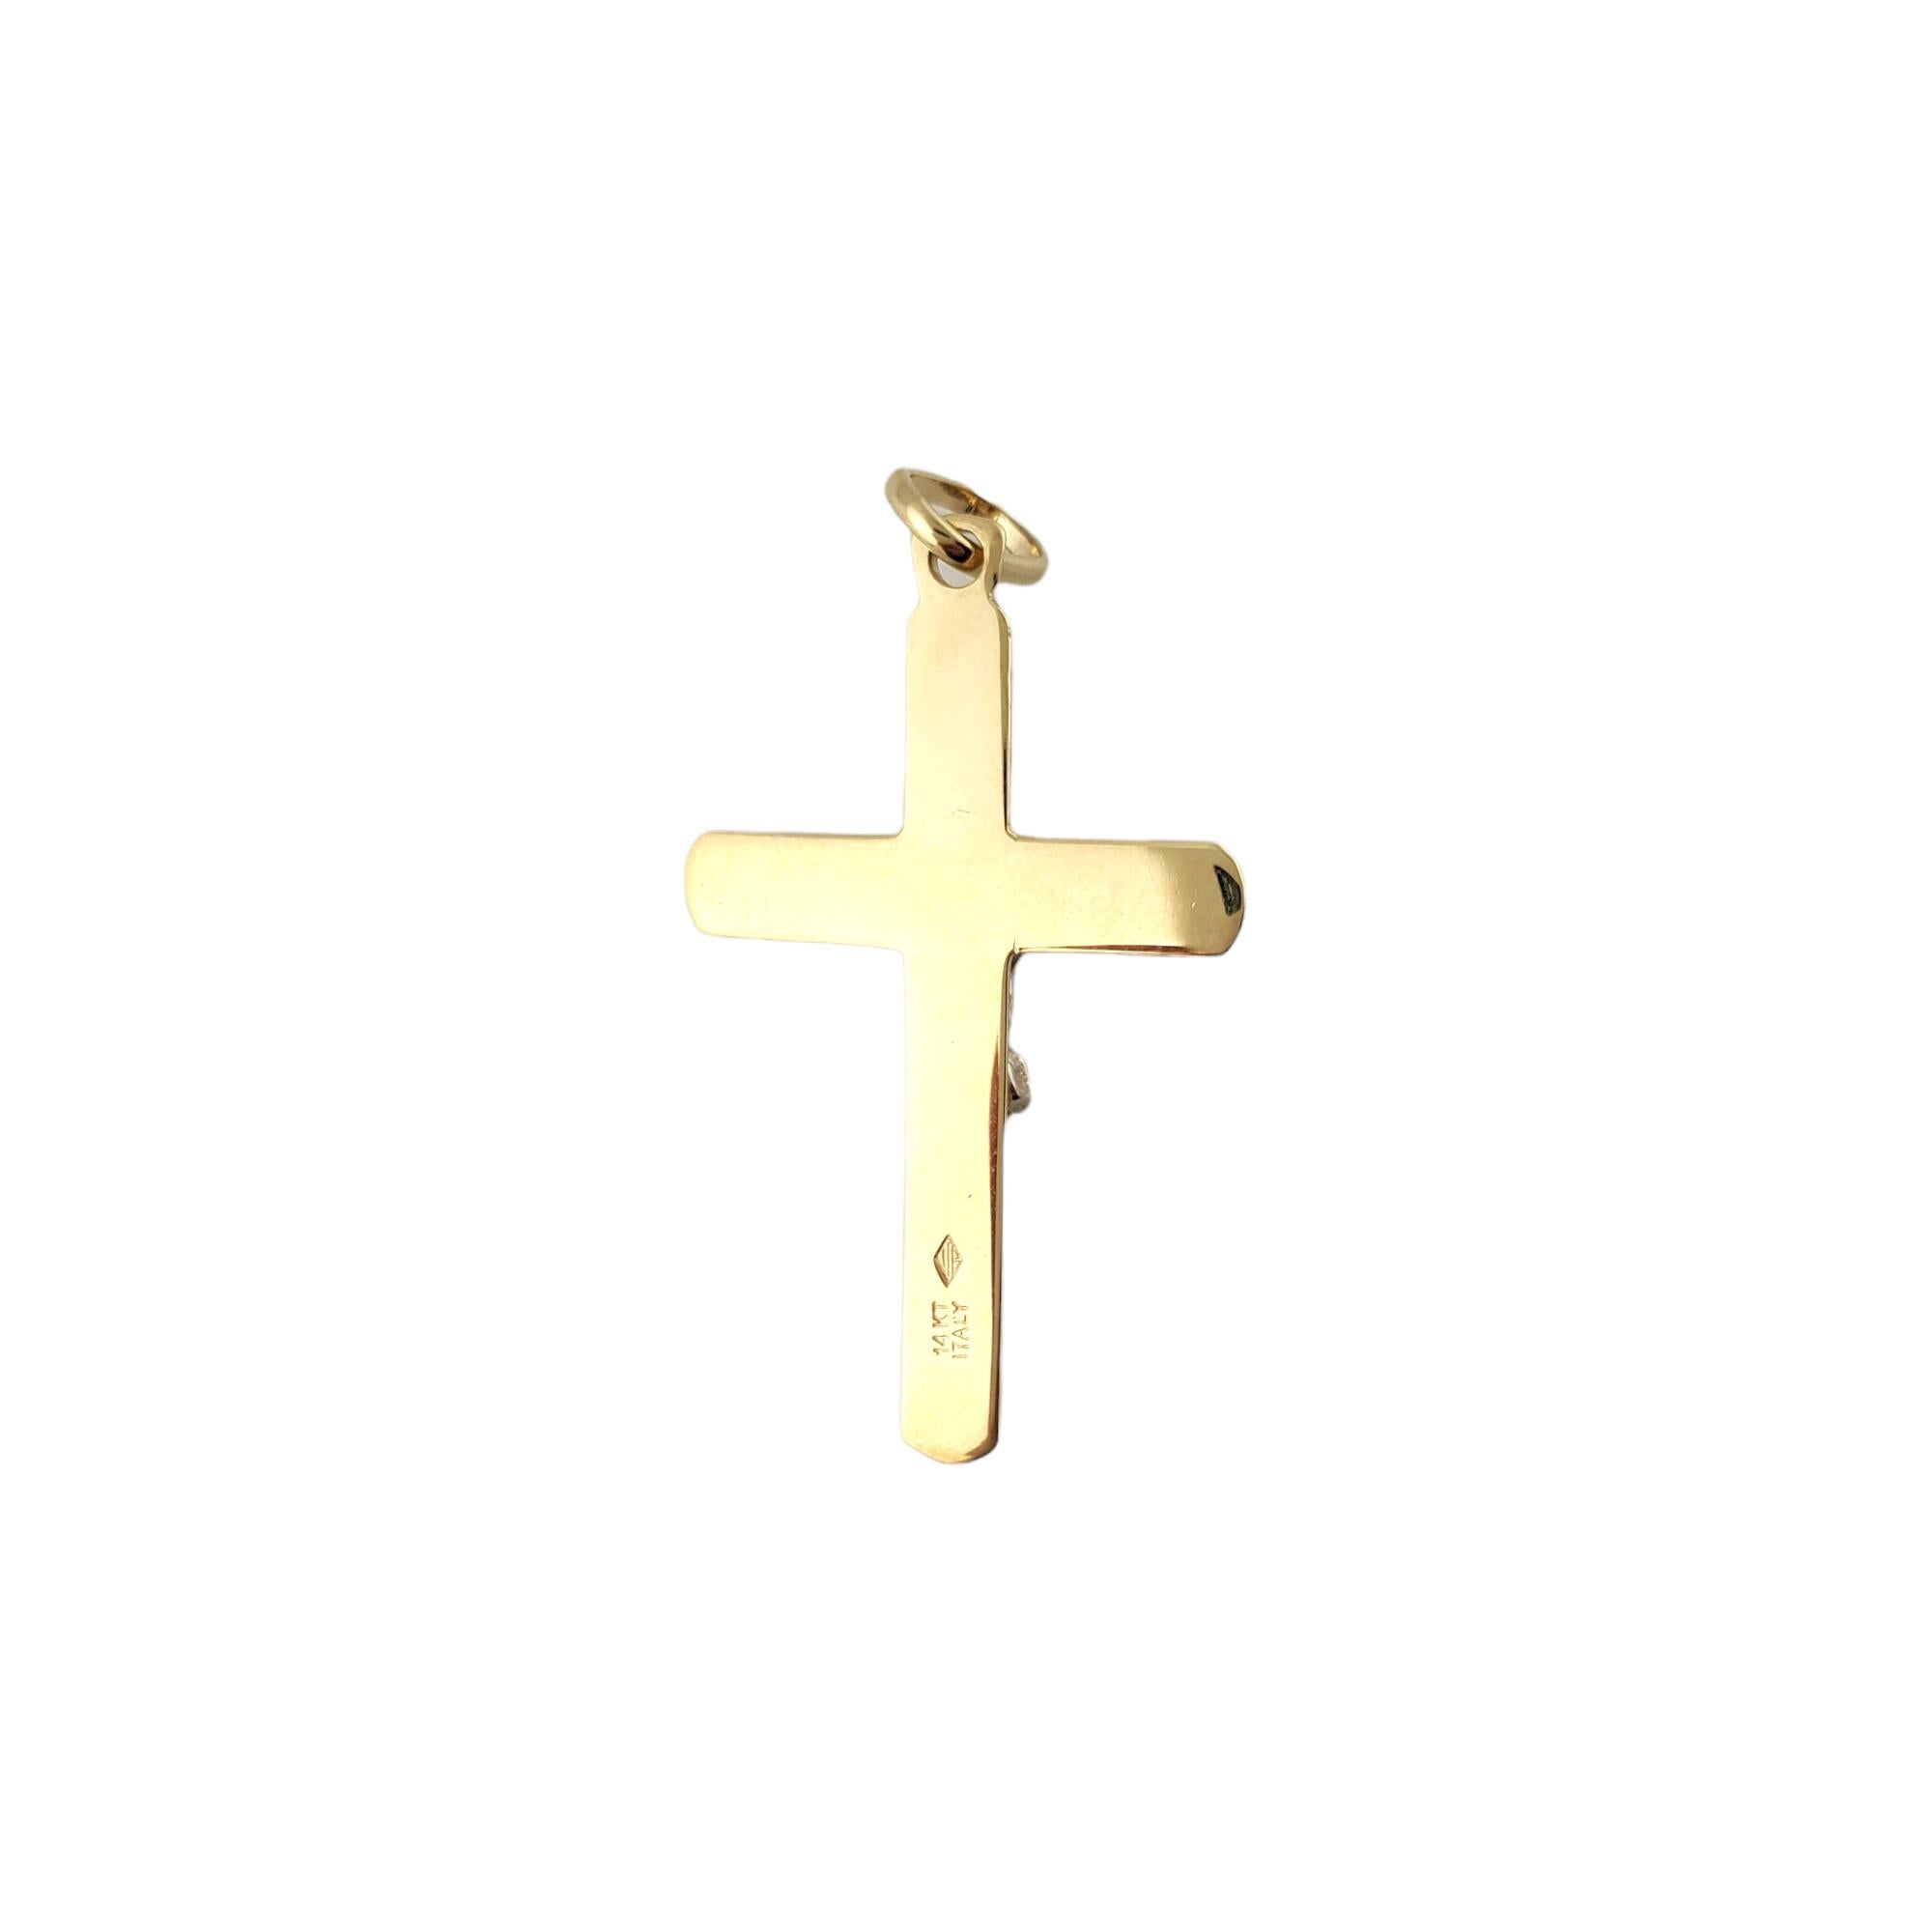 Vintage 14K Yellow Gold Crucifix Pendant

Beautiful crucifix pendant is crafted 14k yellow gold with stunning detail. 

Size: 36mm X 22mm

Weight: 4.0 g/ 2.5 dwt

Hallmark: 14k ITALY

Very good condition, professionally polished.

Will come packaged